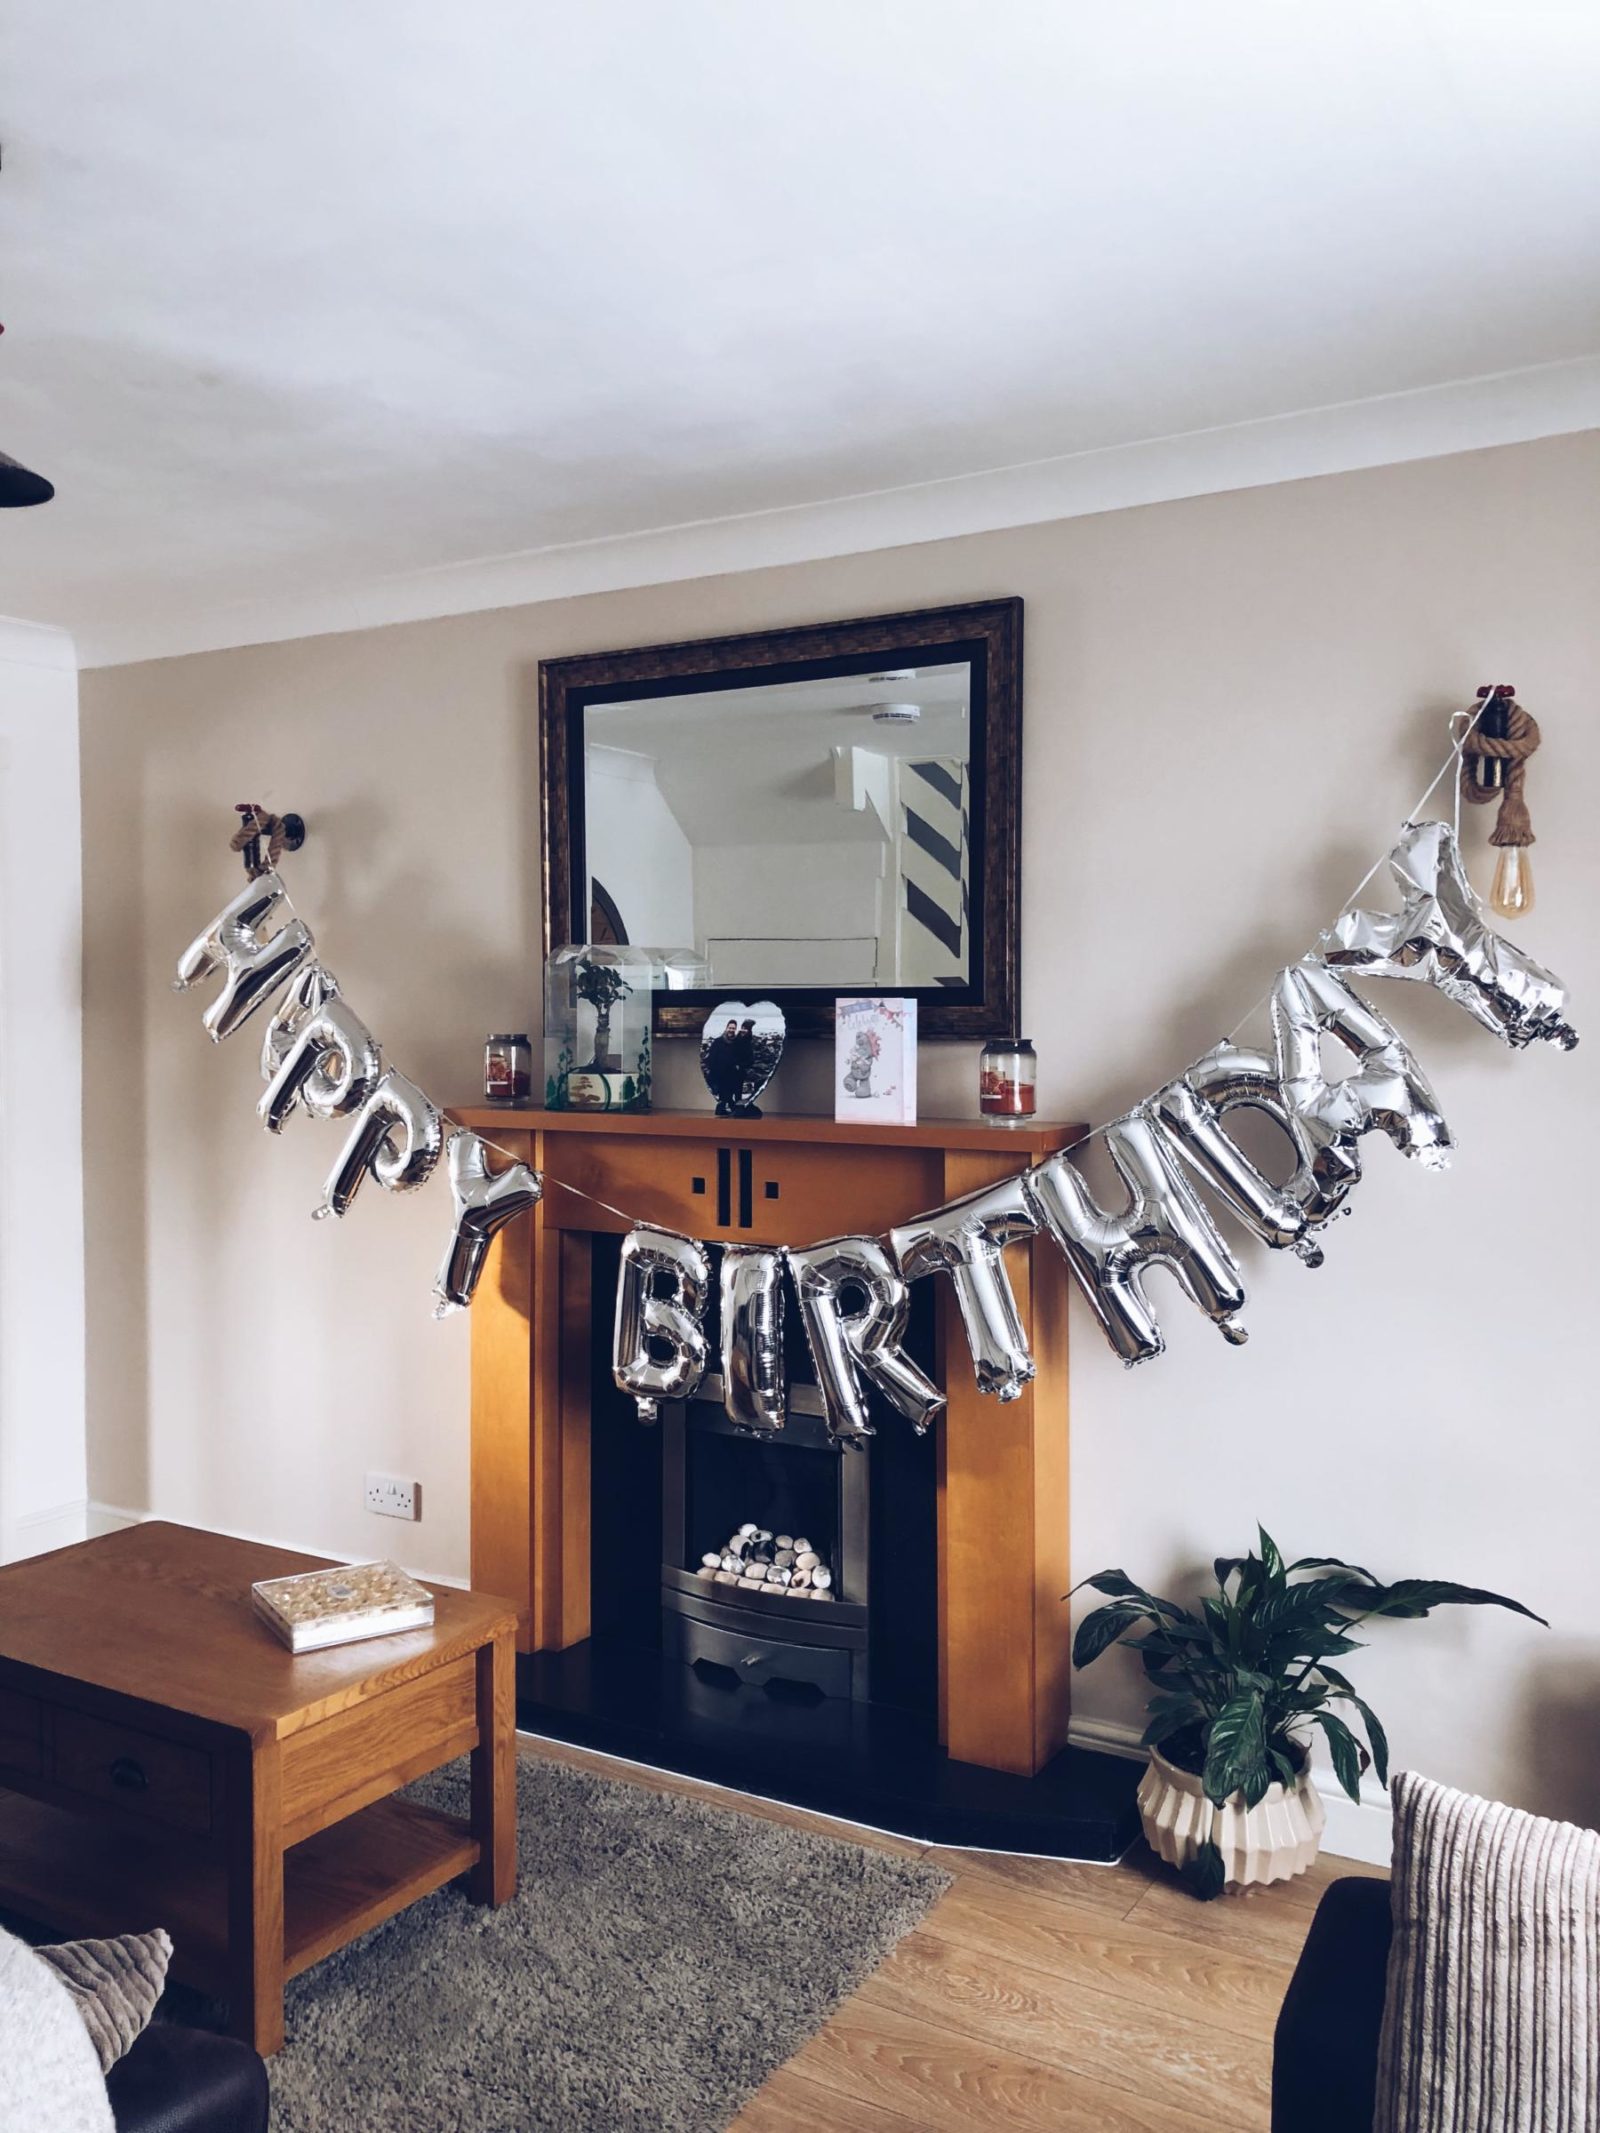 Birthday, cake, celebrations, days out, Cardiff, Penarth, Bonnie the caterpillar, pottery painting, birthday vlog, video diary, shopping, eating out, Bill’s, photo diary.